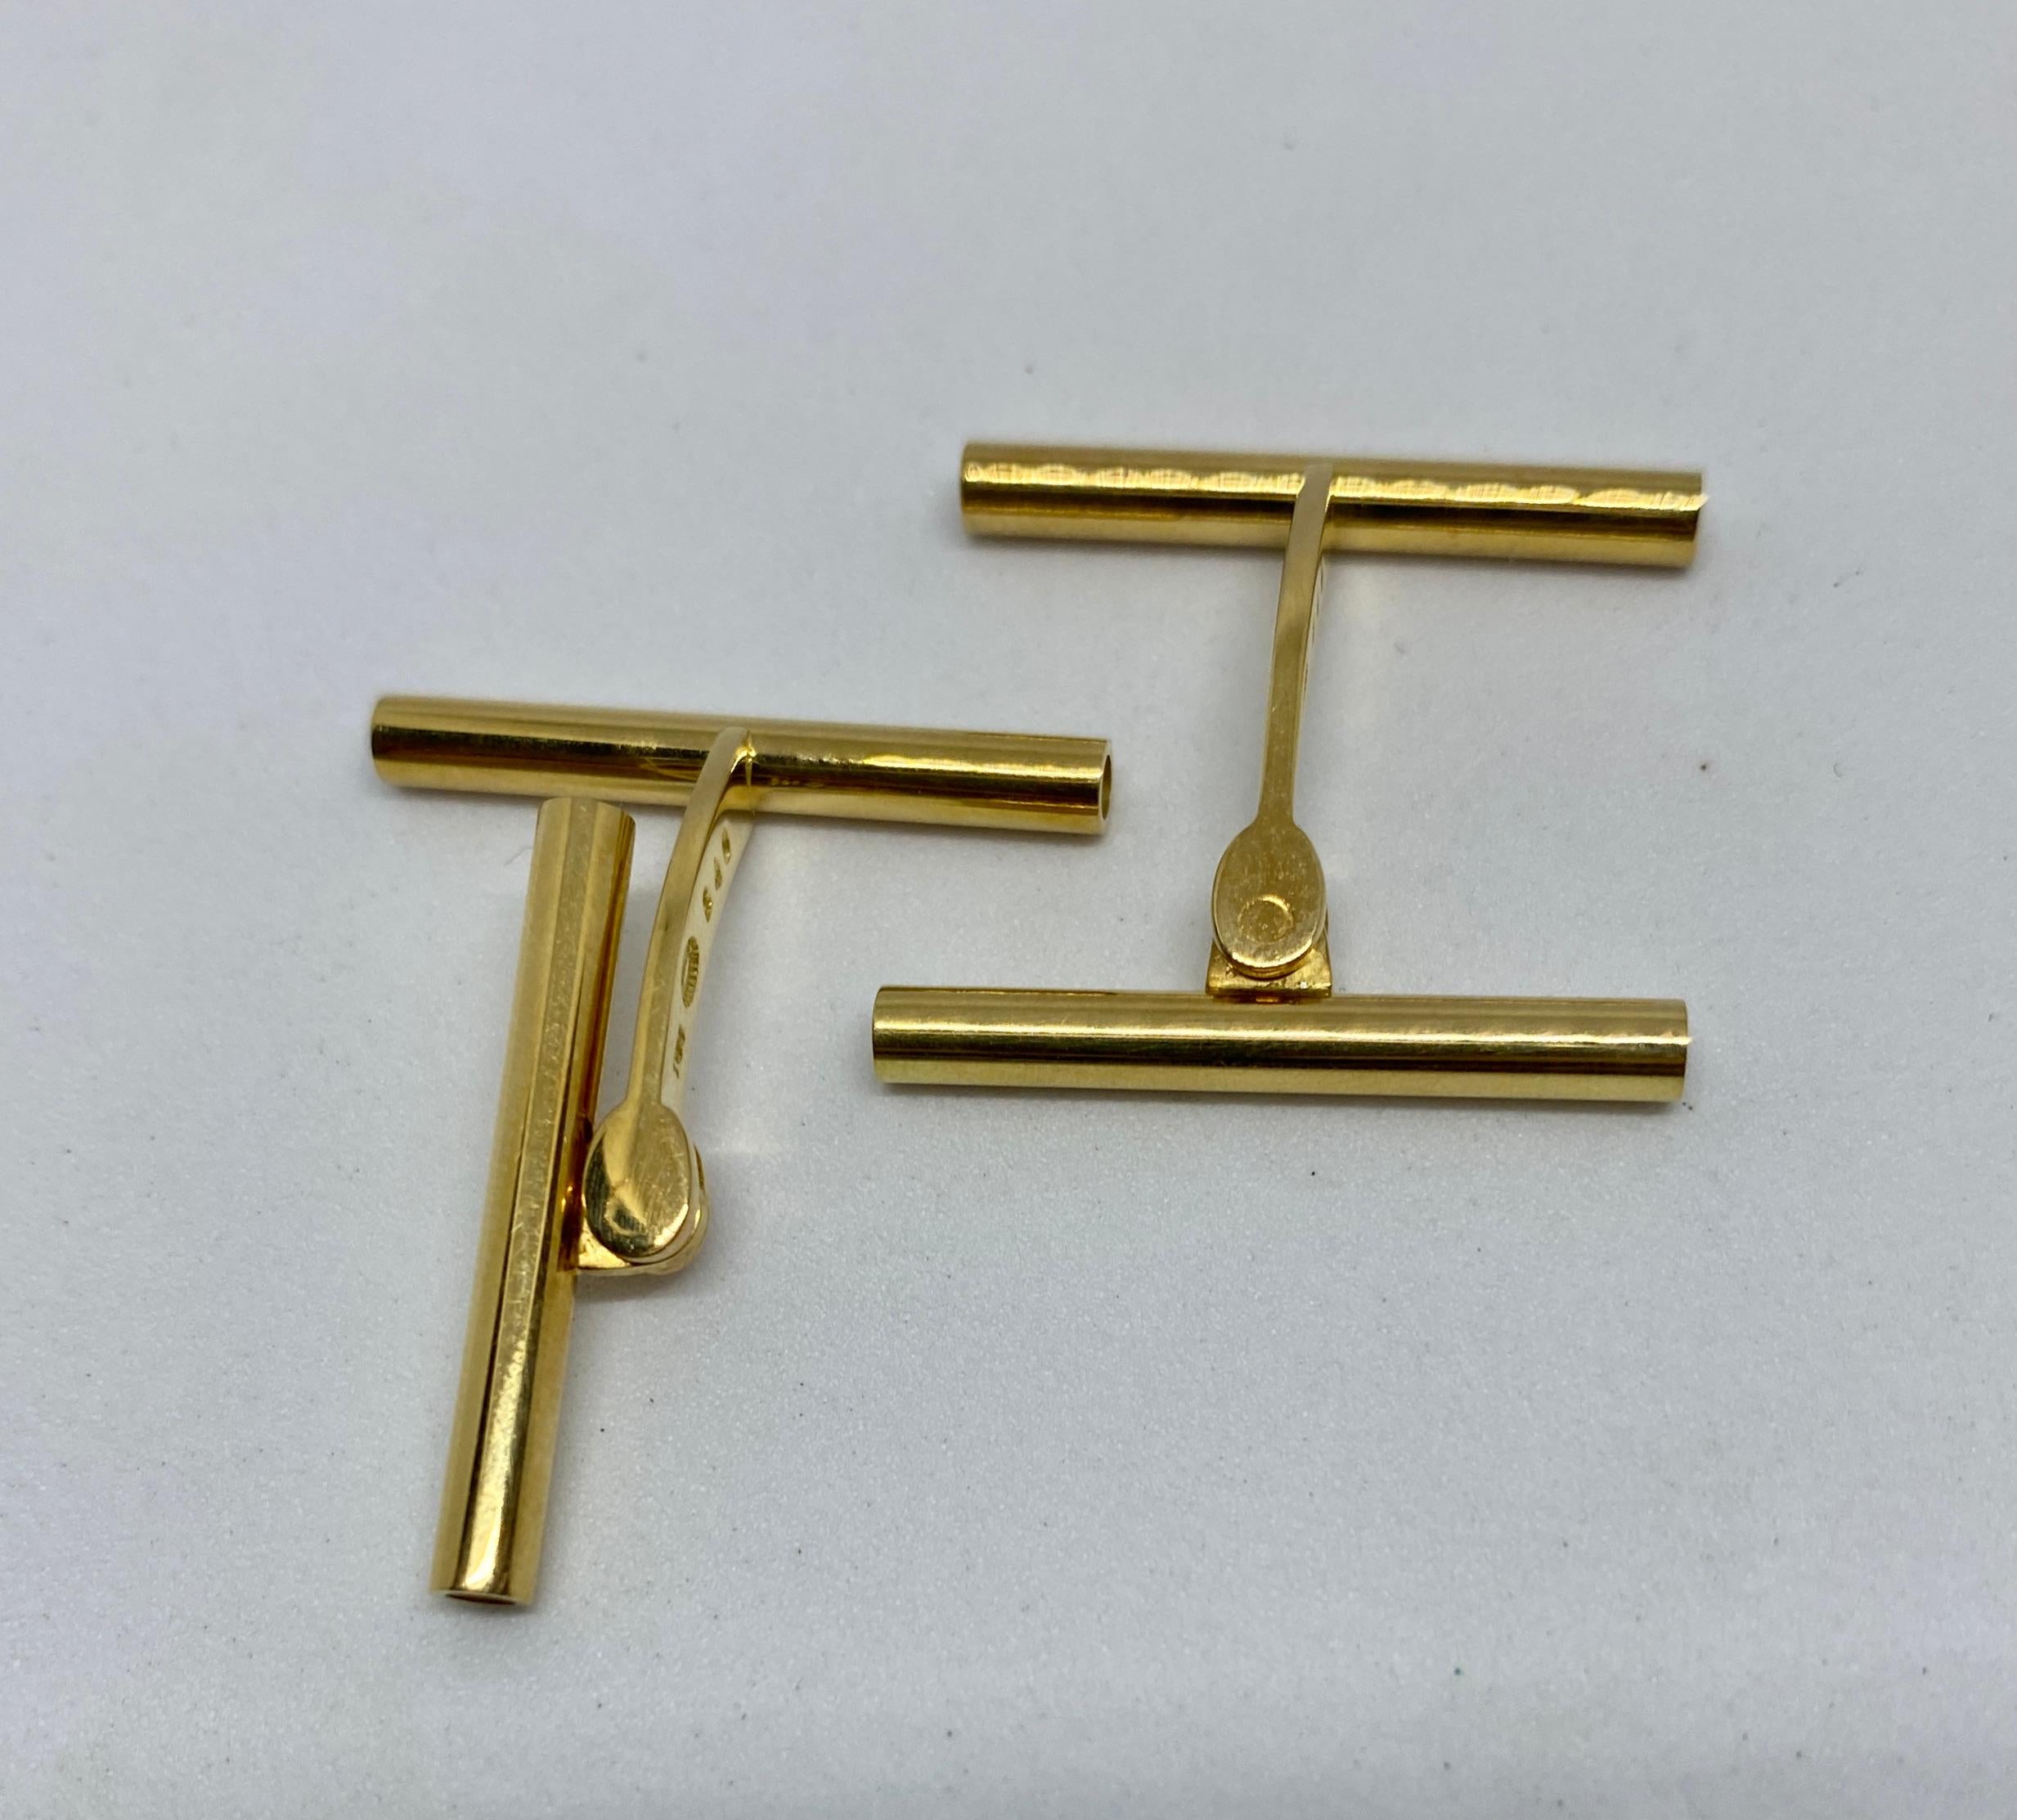 Tubular Cufflinks in 18K Yellow Gold by Georg Jensen In Excellent Condition For Sale In San Rafael, CA